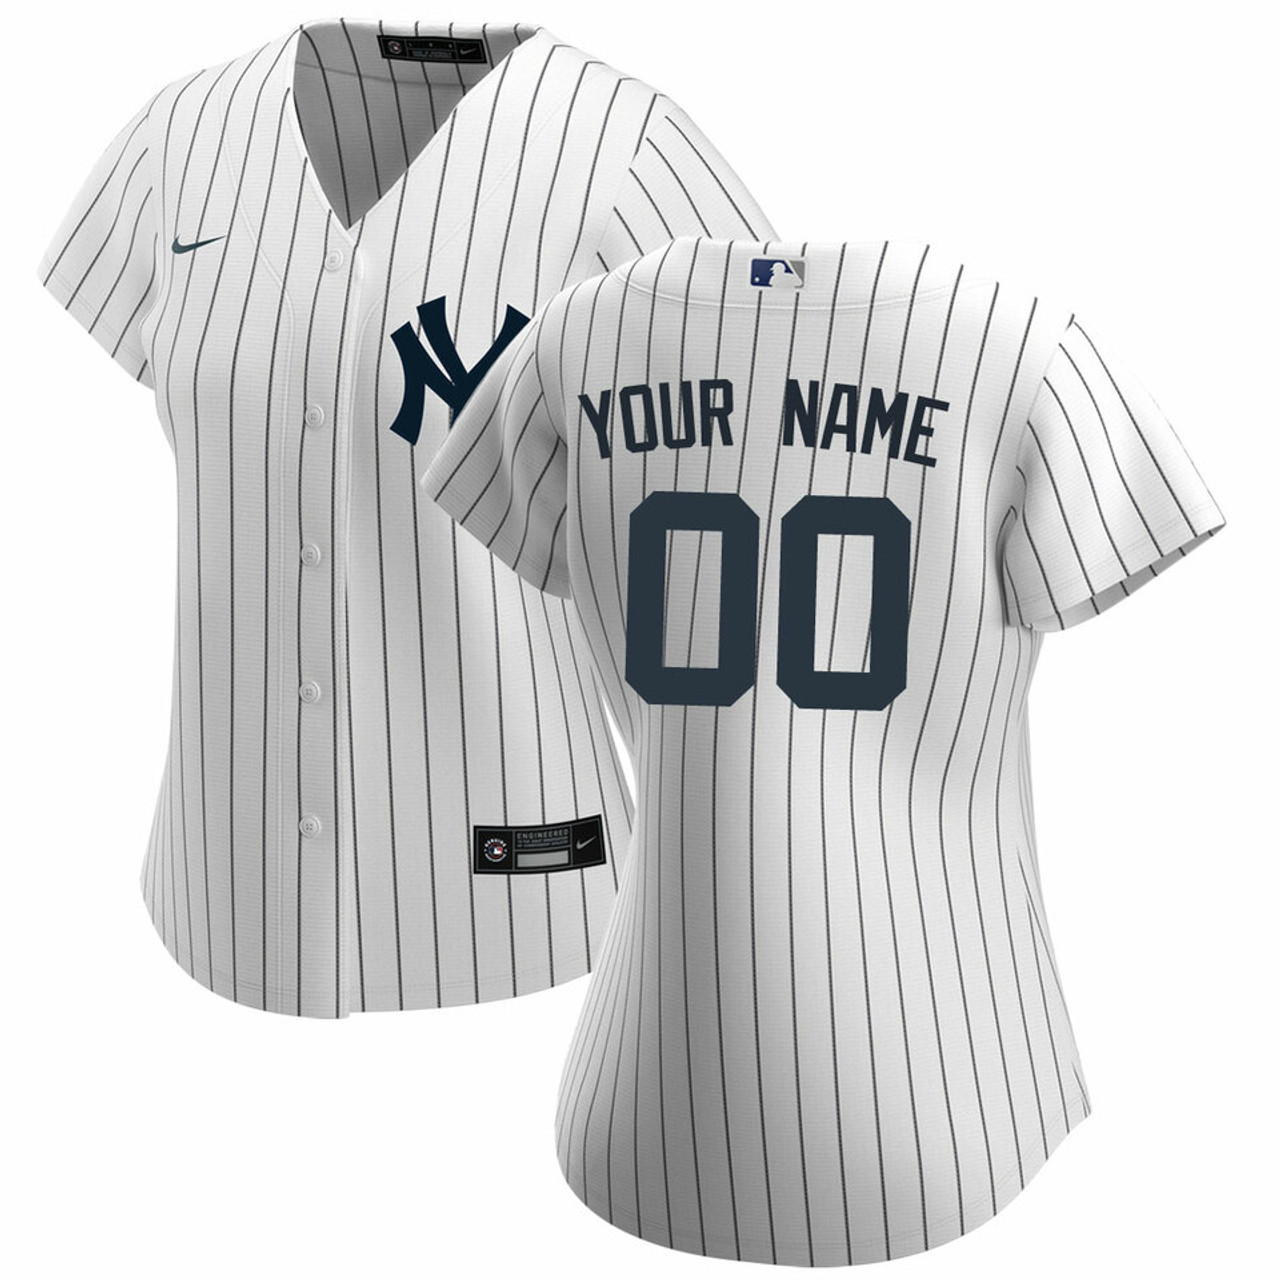 Yankees Hire Legends for Jersey Patch Sponsor Search –